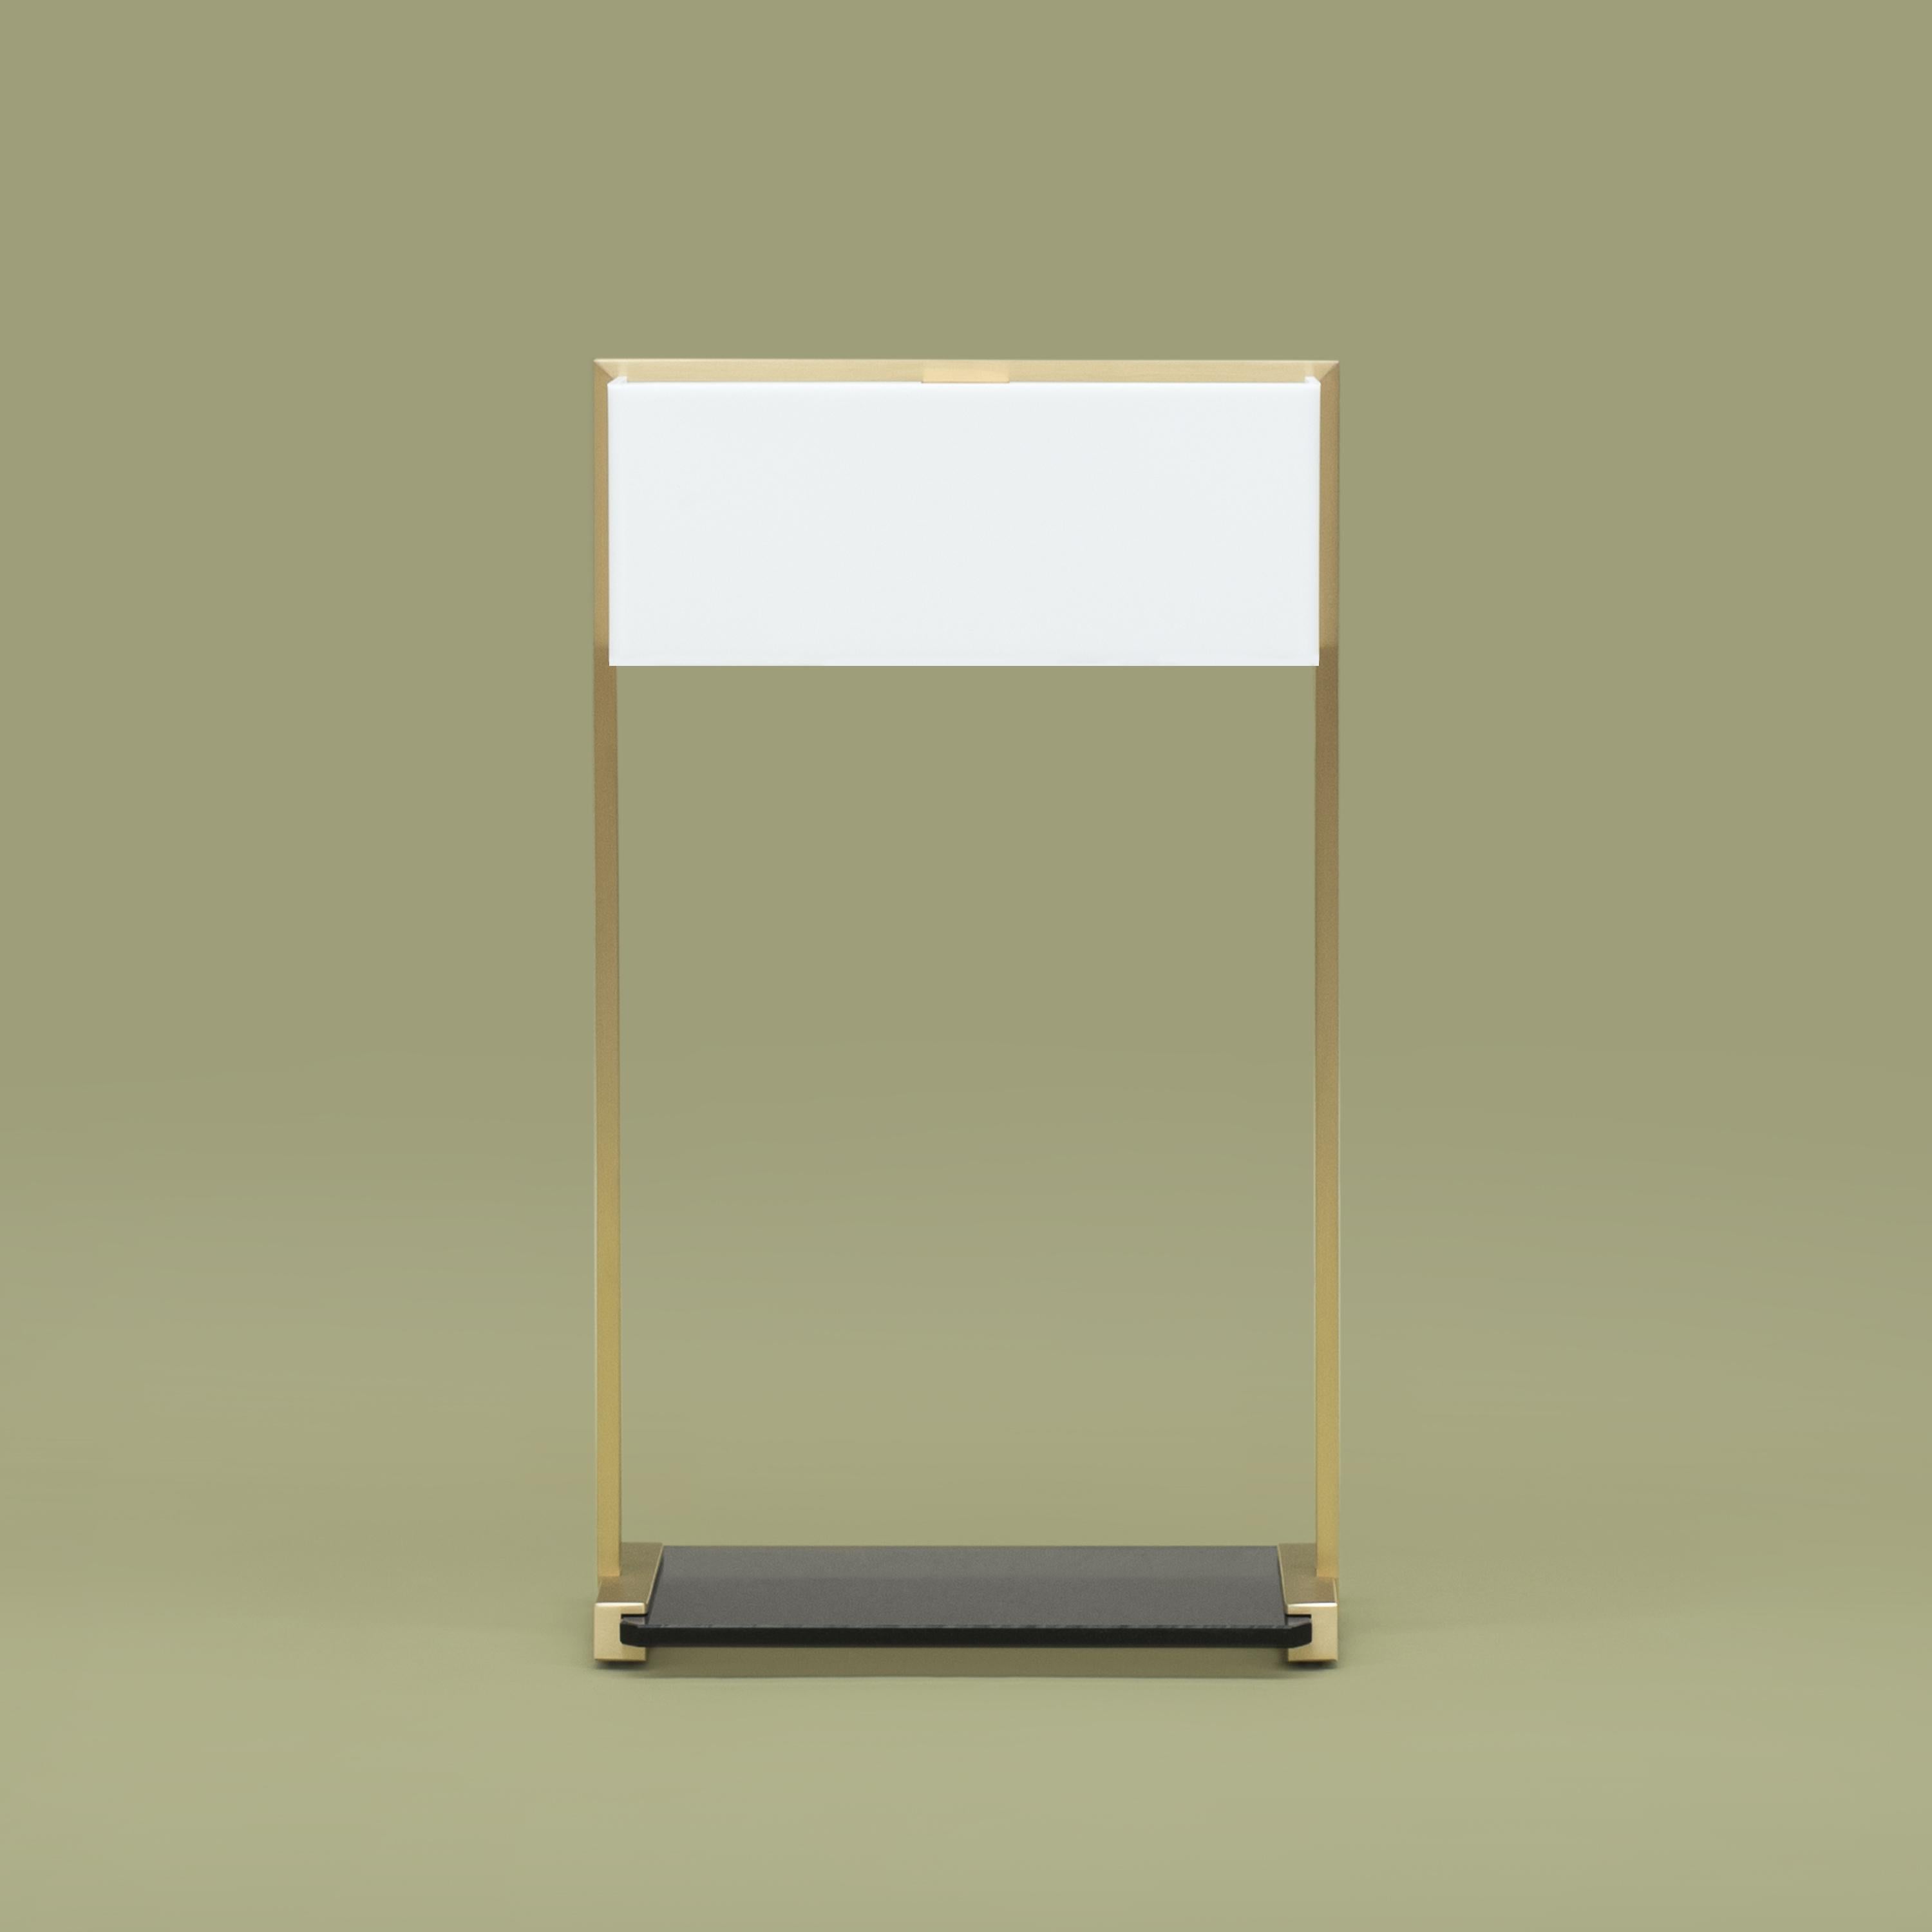 Table lamp designed by Peter Ghyczy in 2006.
Manufactured by Ghyczy, (Netherlands)

This table lamp is a multi-tasker. The spacious construction of high quality metals leaves room for multiple ways of use as a bedside or table lamp or even a